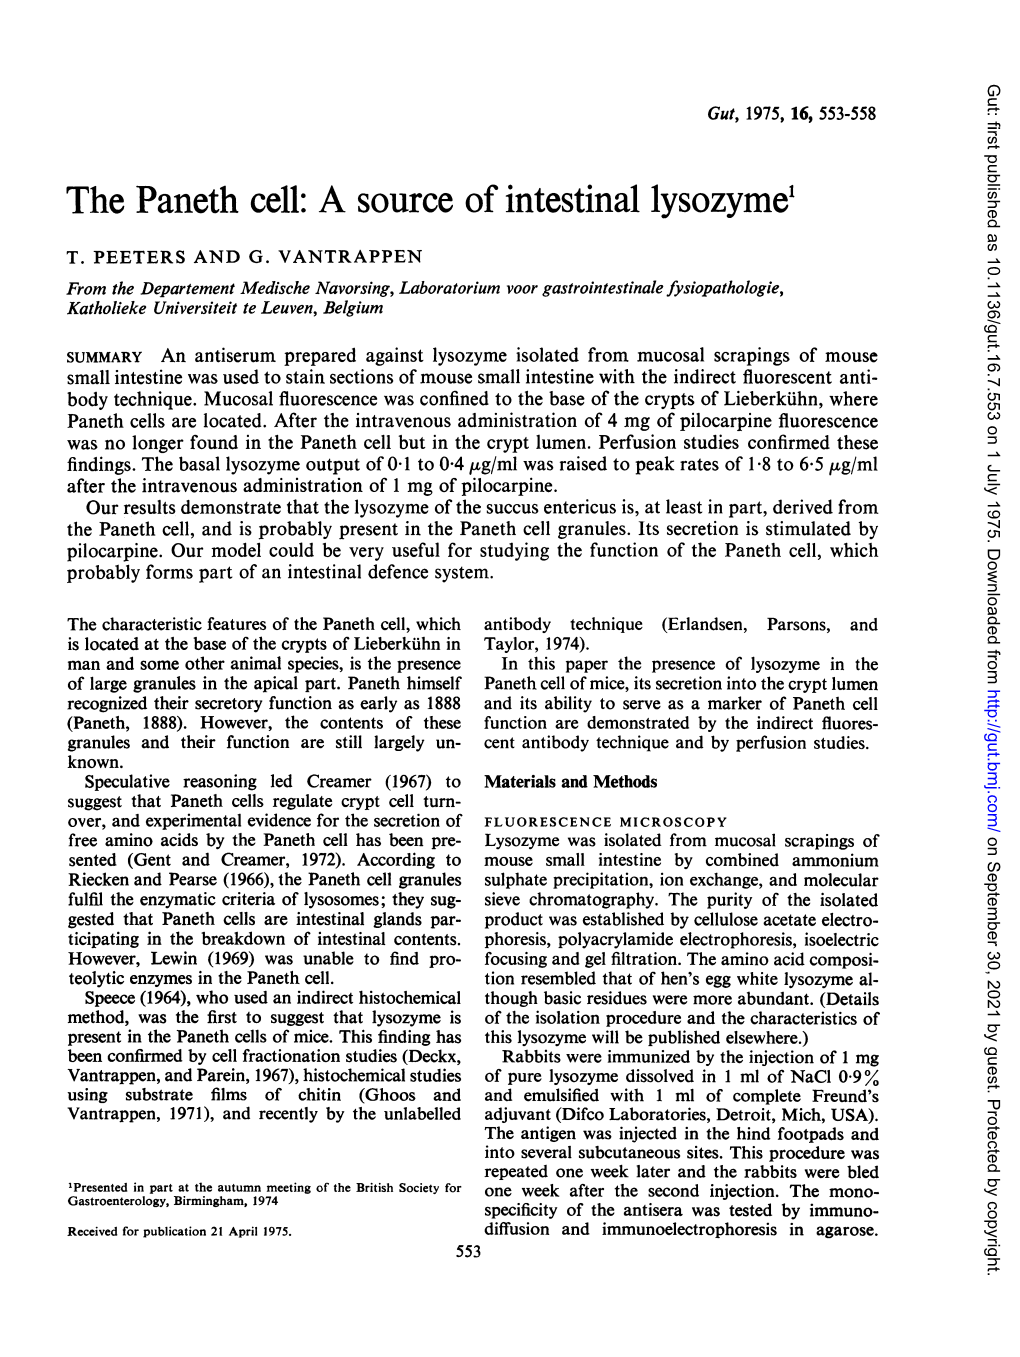 The Panethcell: a Source of Intestinal Lysozyme'